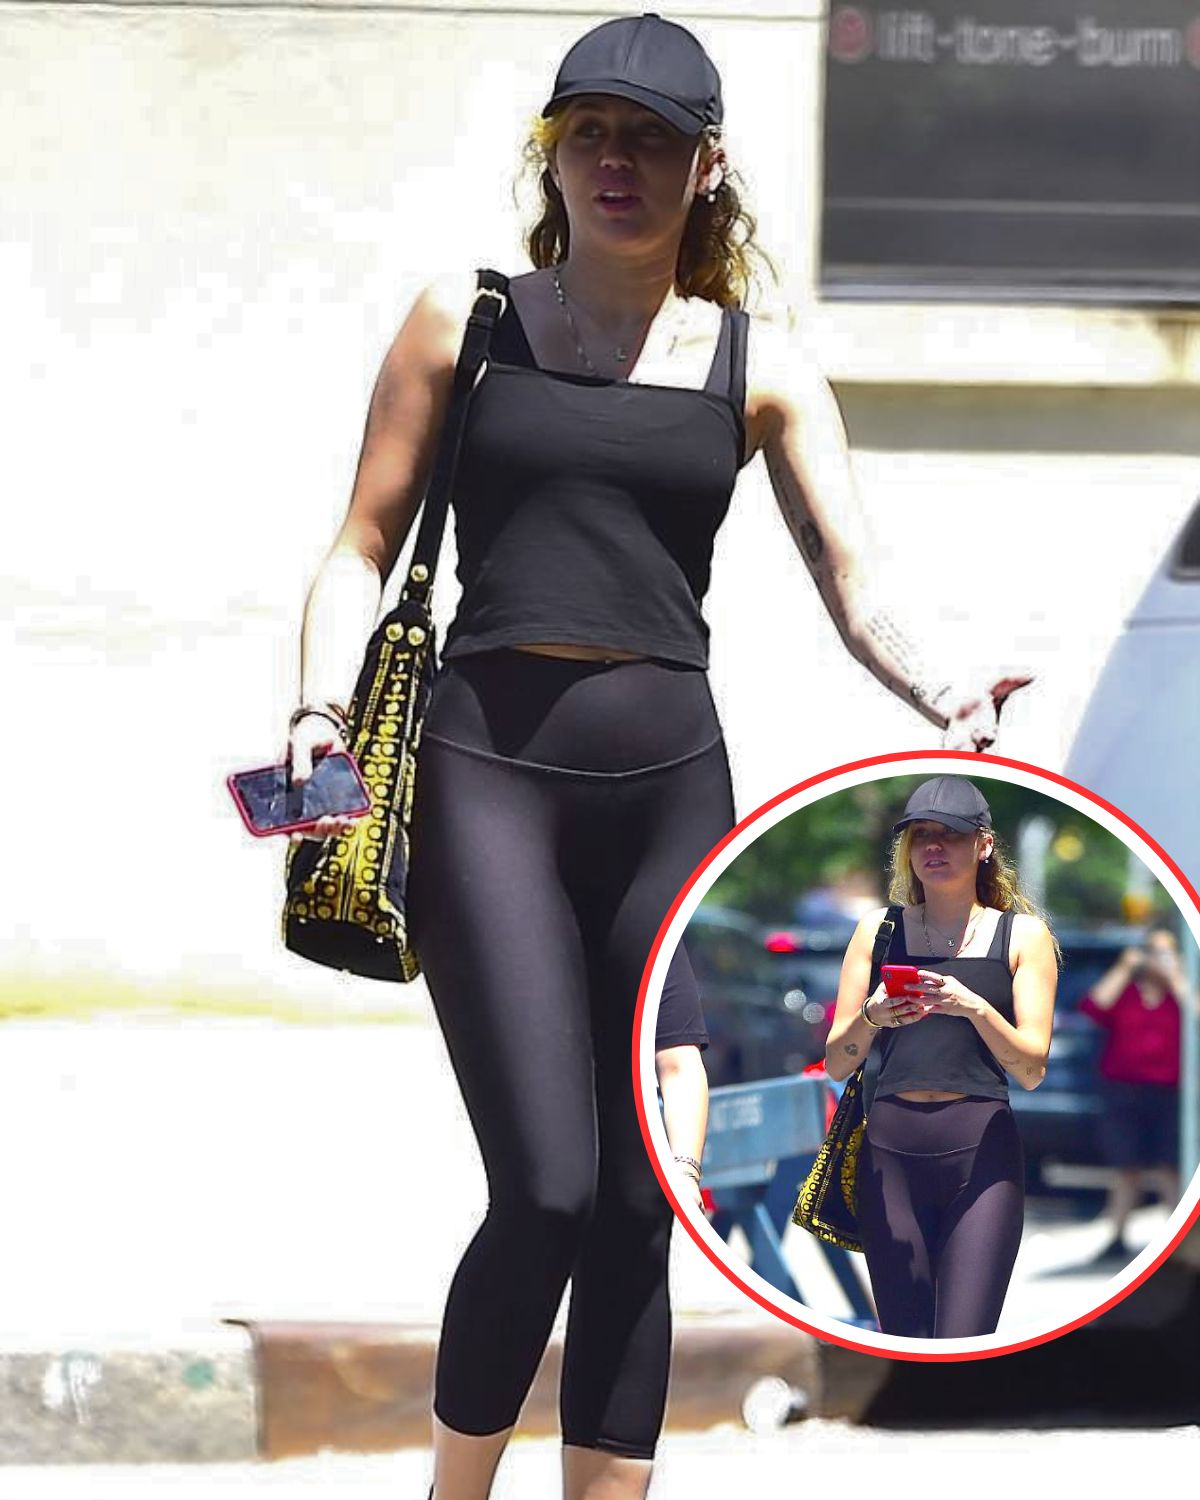 Cover Image for Miley Cyrus shows off her fit frame in clinging leggings and sheer top after gym session in NYC